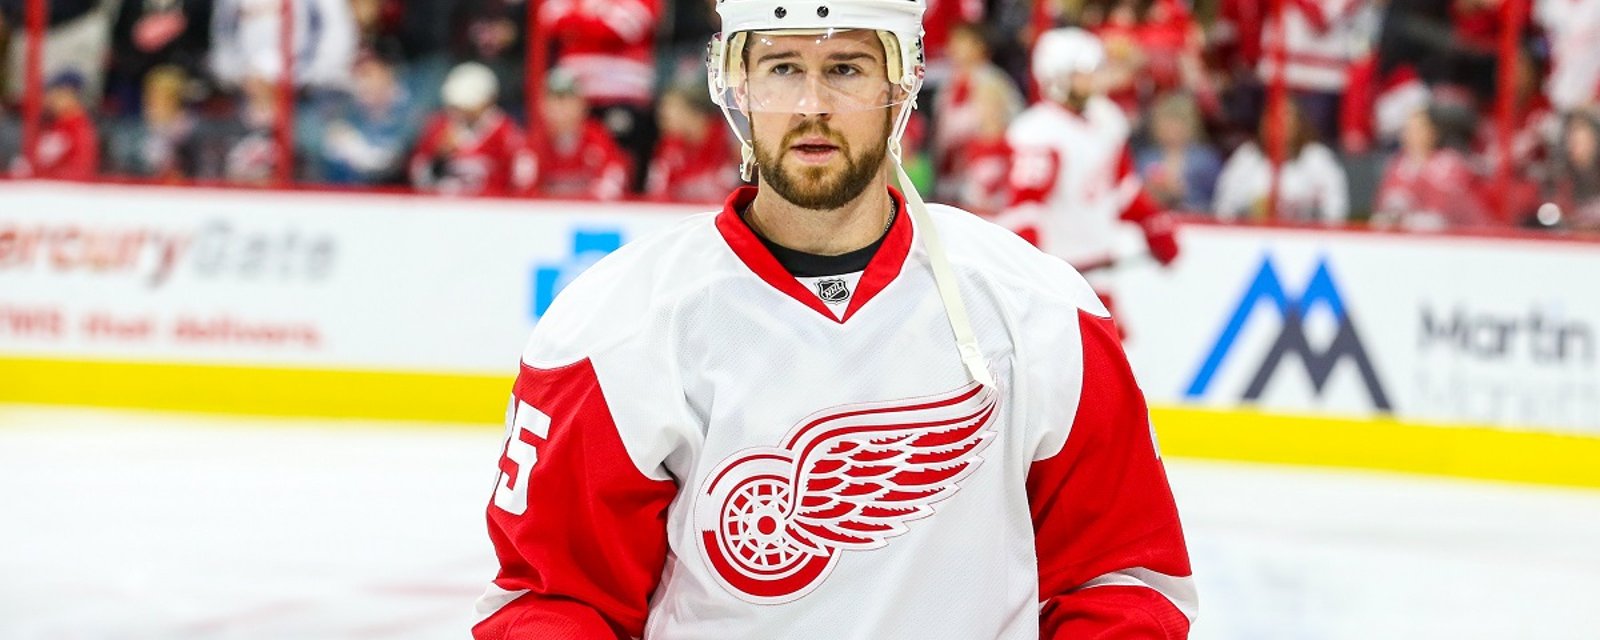 The Edmonton Oilers have acquired defenseman Mike Green.